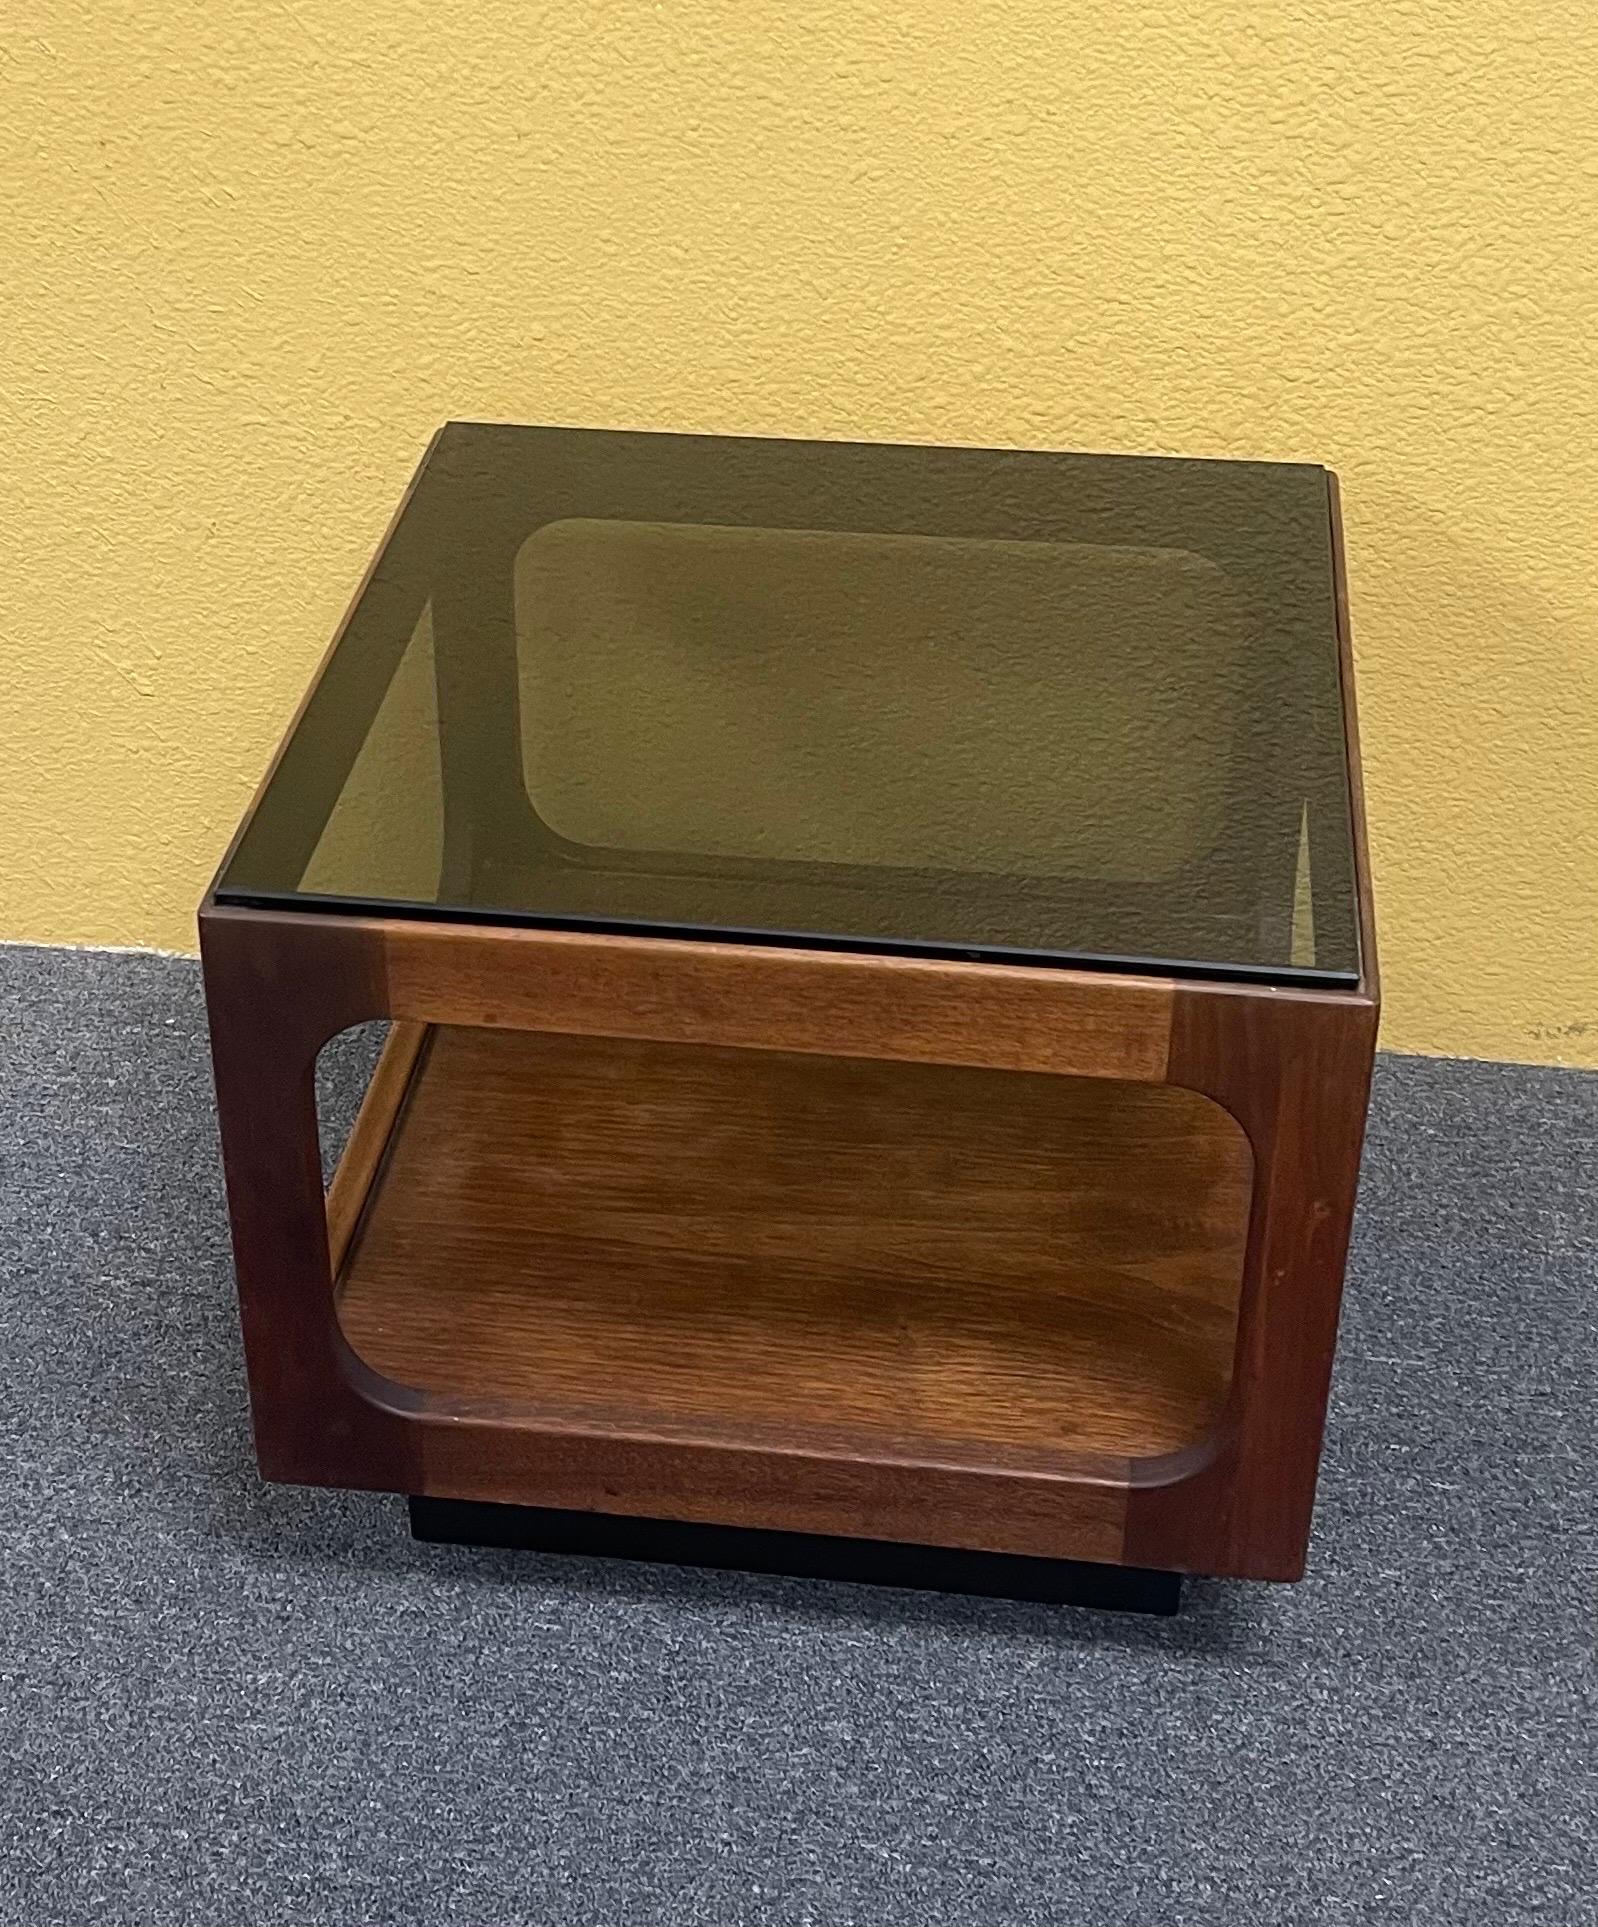 20th Century California Modern Smoked Glass Walnut End Table by John Keal for Brown Saltman For Sale